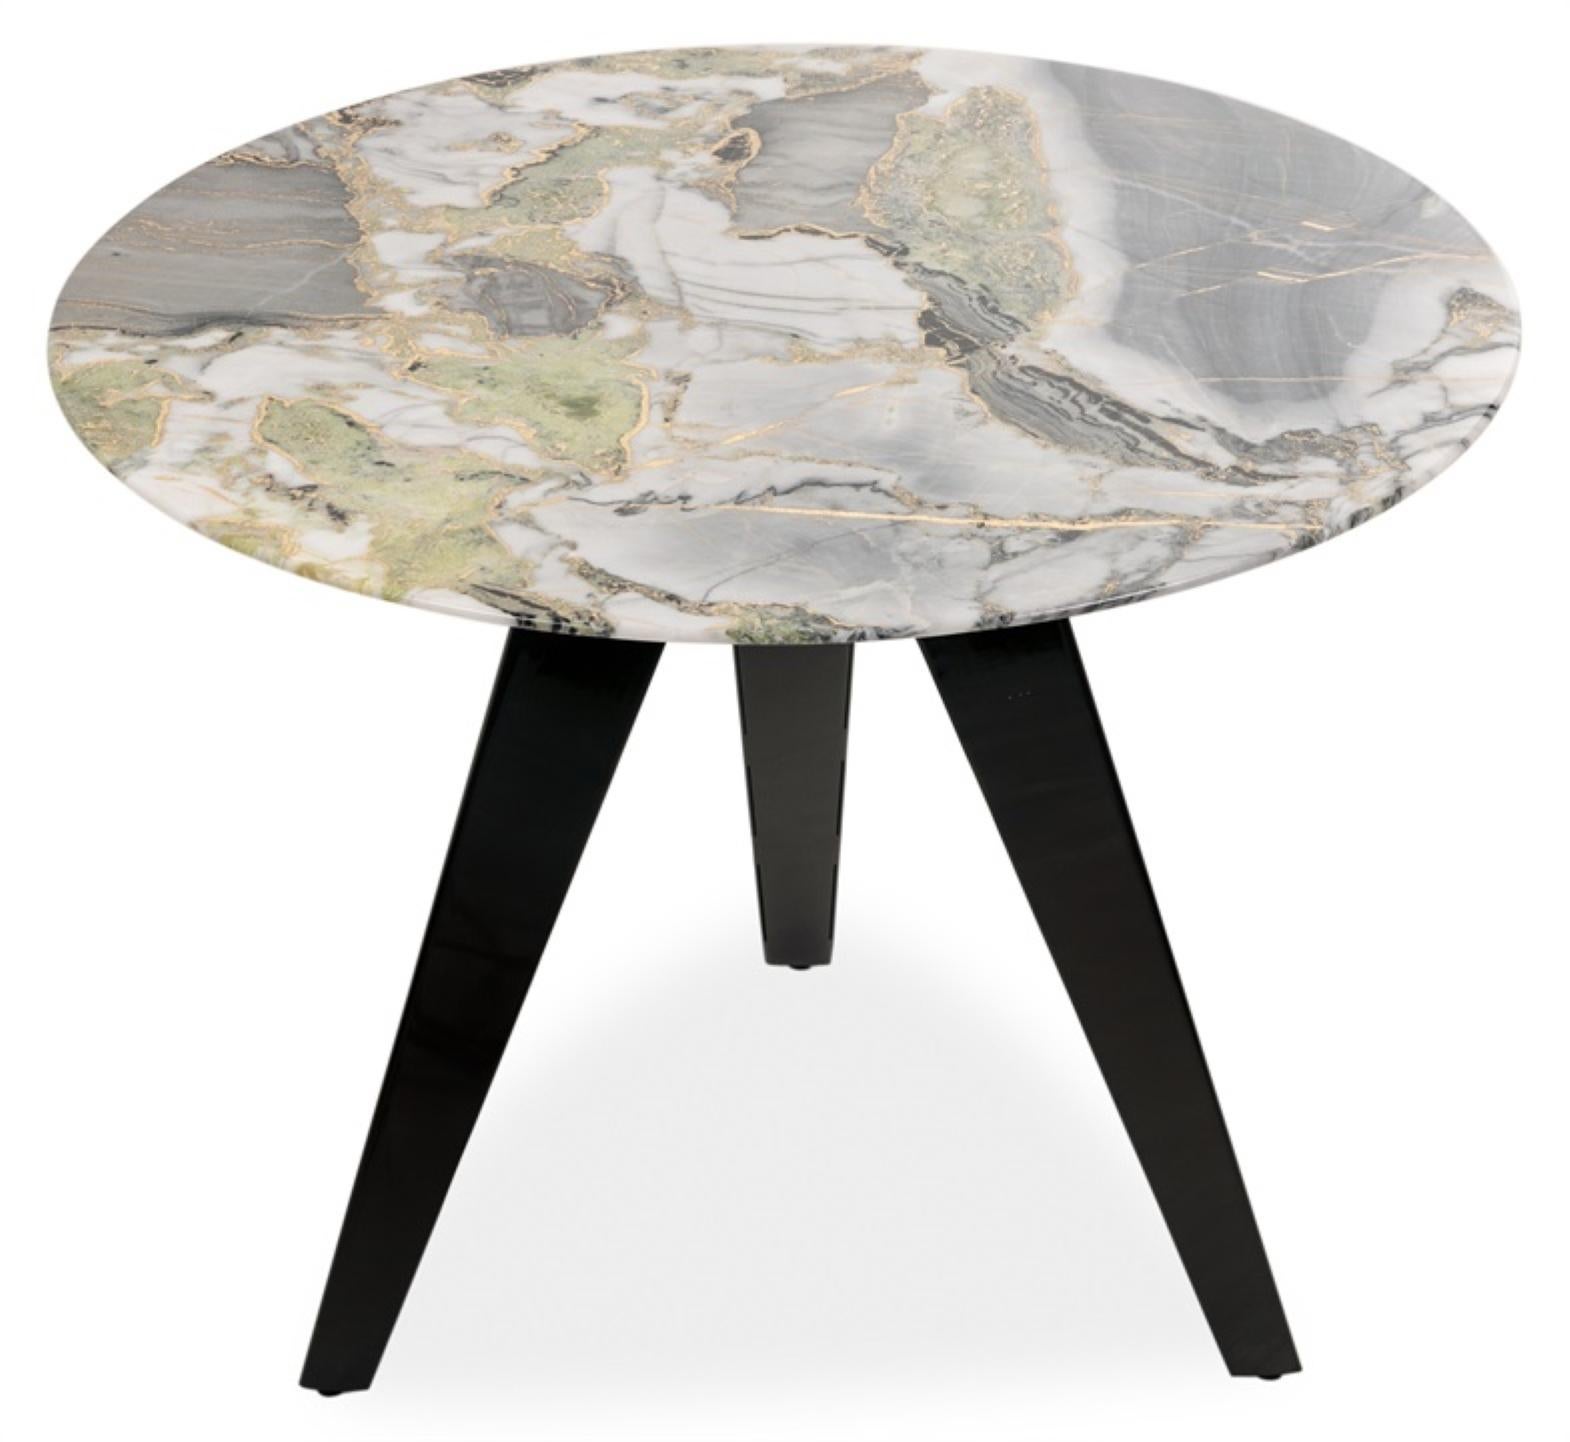 A balanced yet exciting round side table, hand-constructed with superlative craftsmanship. Available in a White Beauty Marble from China etched with the Spider technique. Adorned with striking Gold Metal Leaf inlays accentuating the veins. Resting